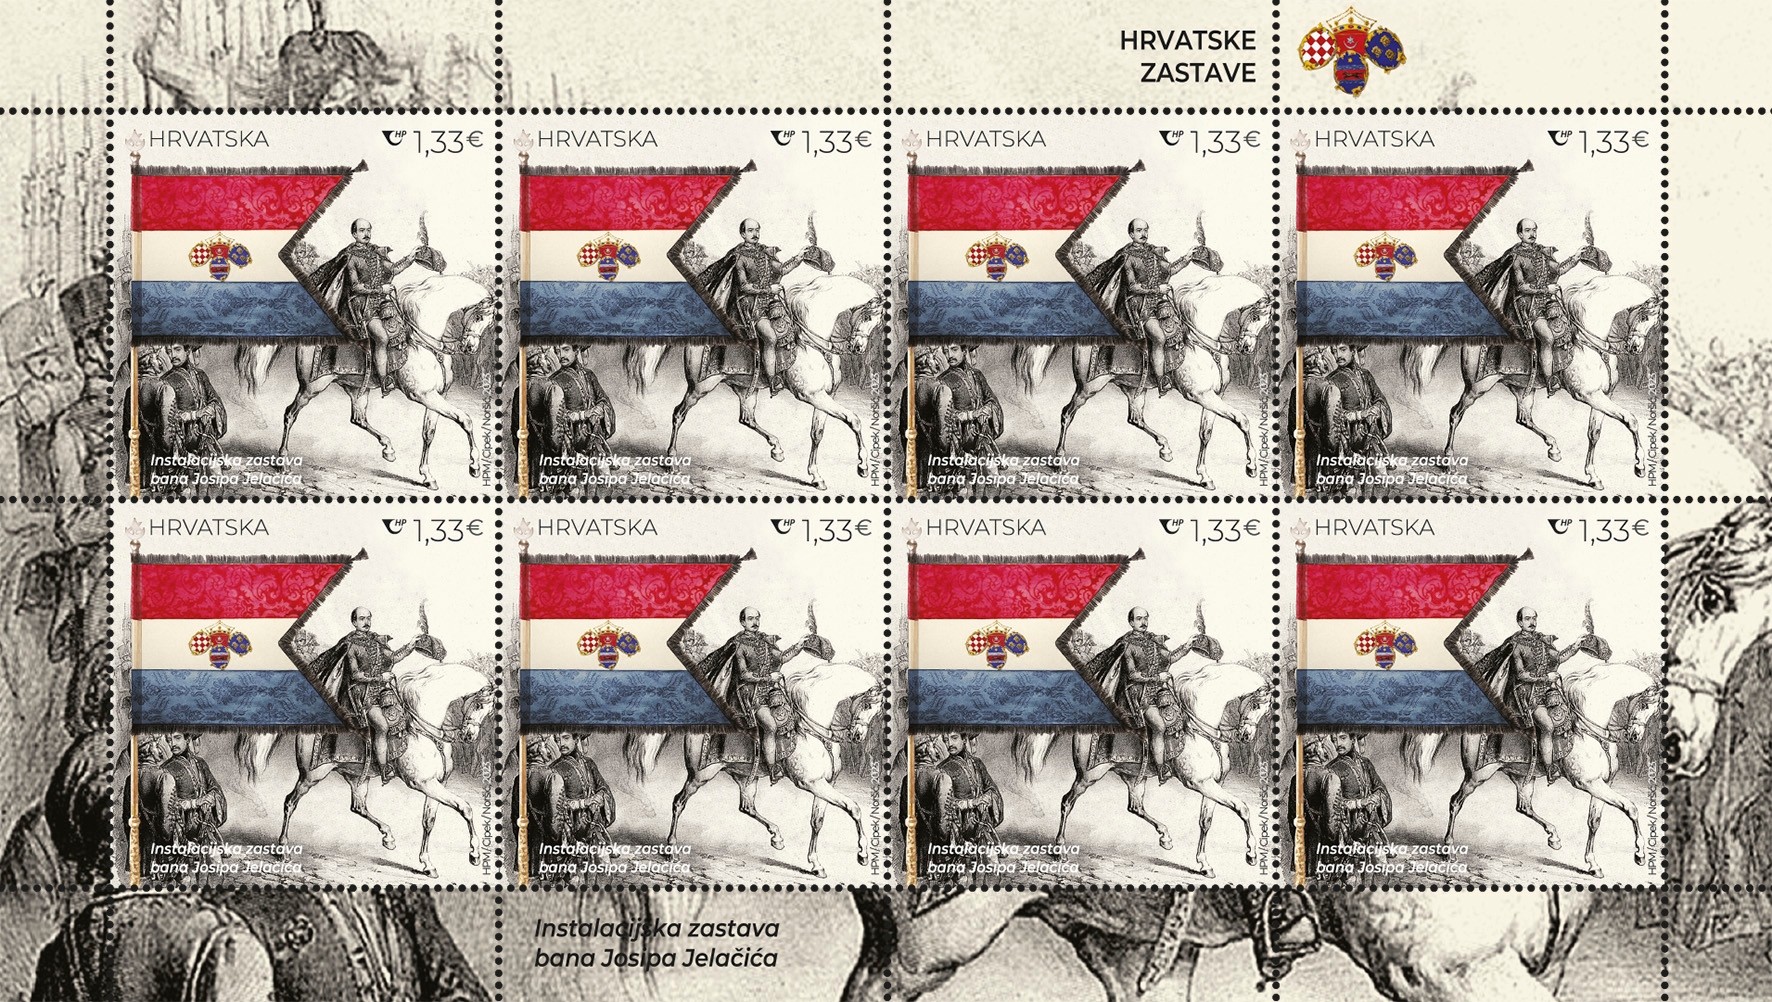 Commemorative stamps combining first official tricolour and modern Croatian flag released